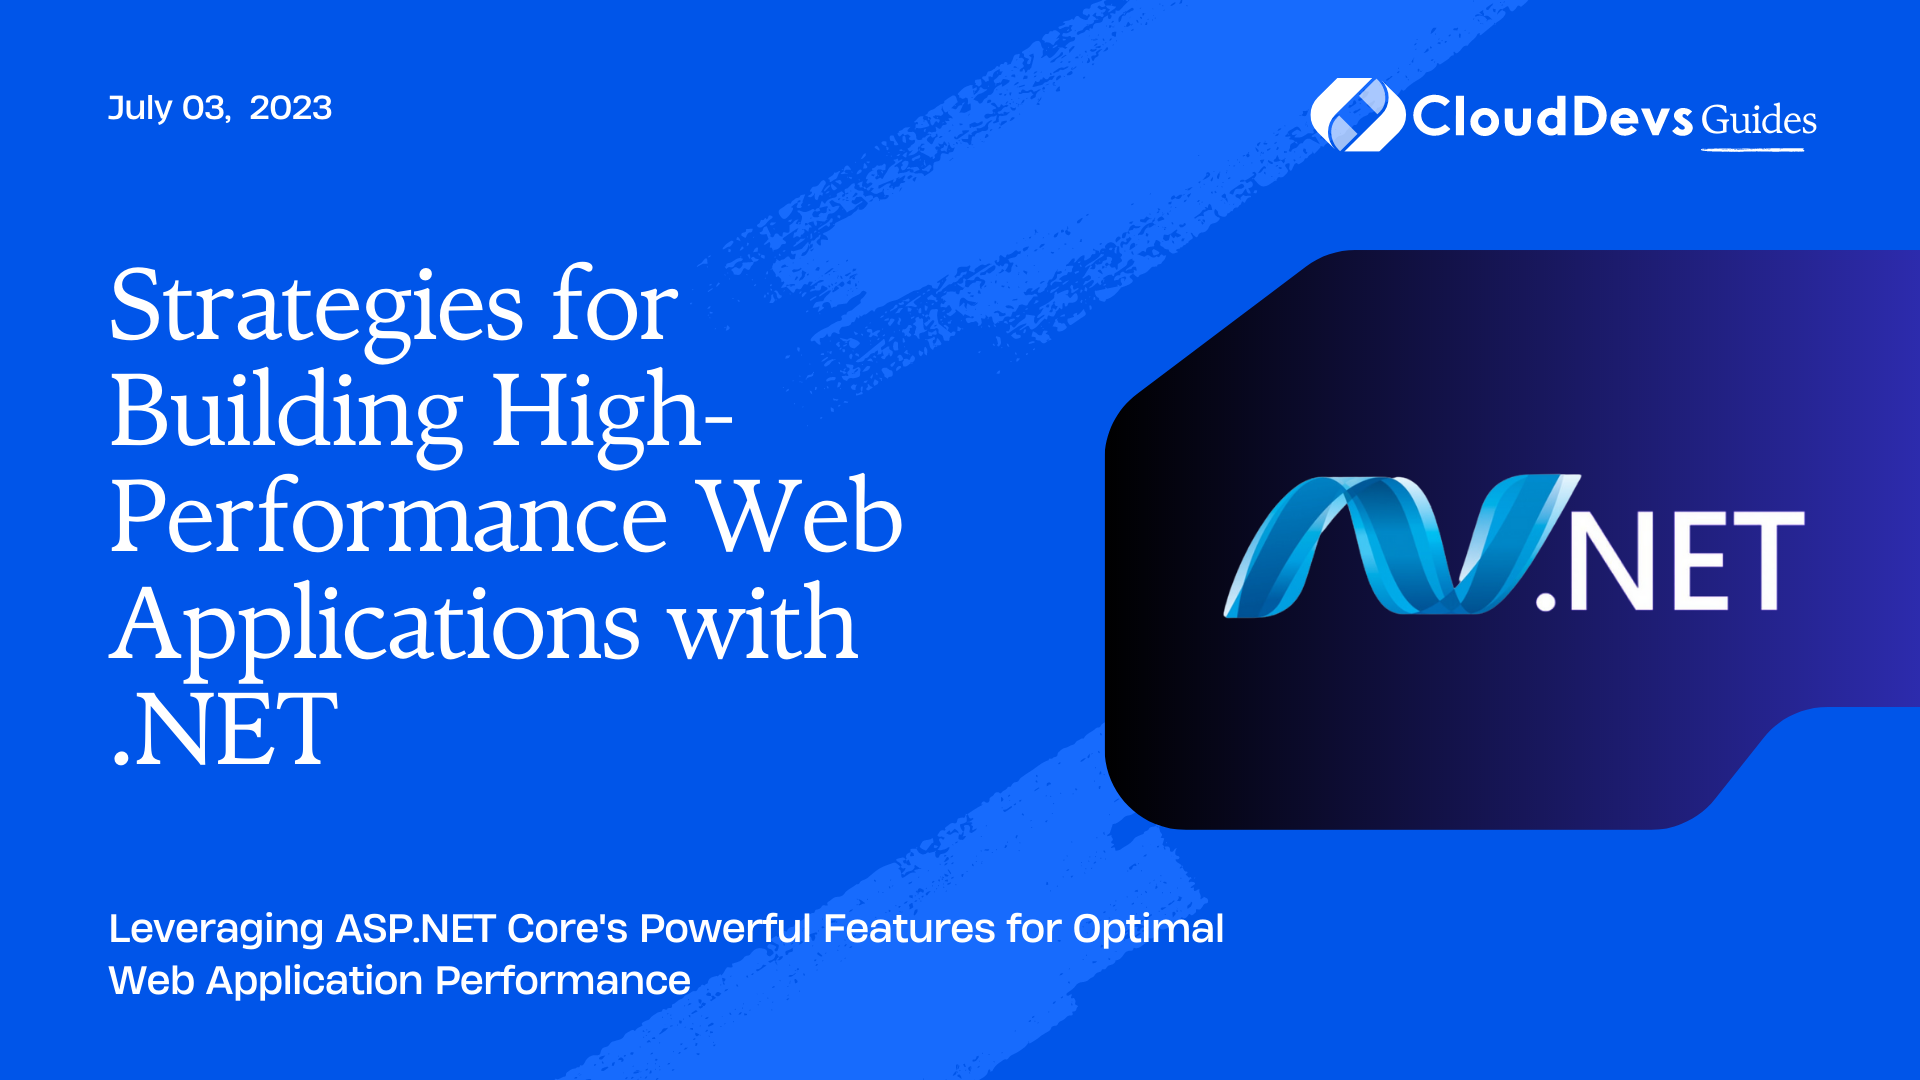 Strategies for Building High-Performance Web Applications with .NET